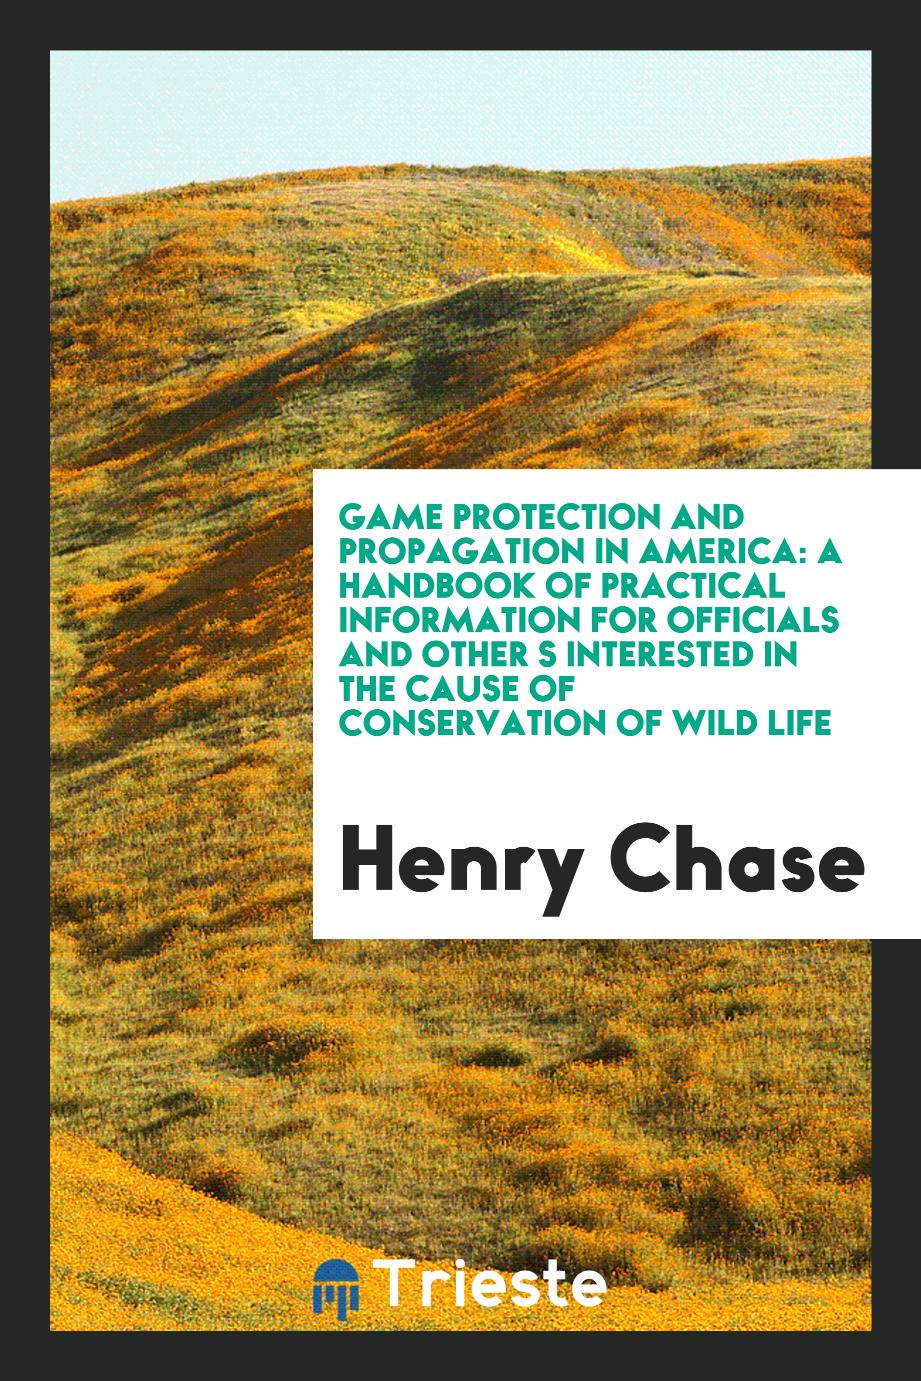 Game Protection and Propagation in America: A Handbook of Practical Information for Officials and Other S Interested in the Cause of Conservation of Wild Life